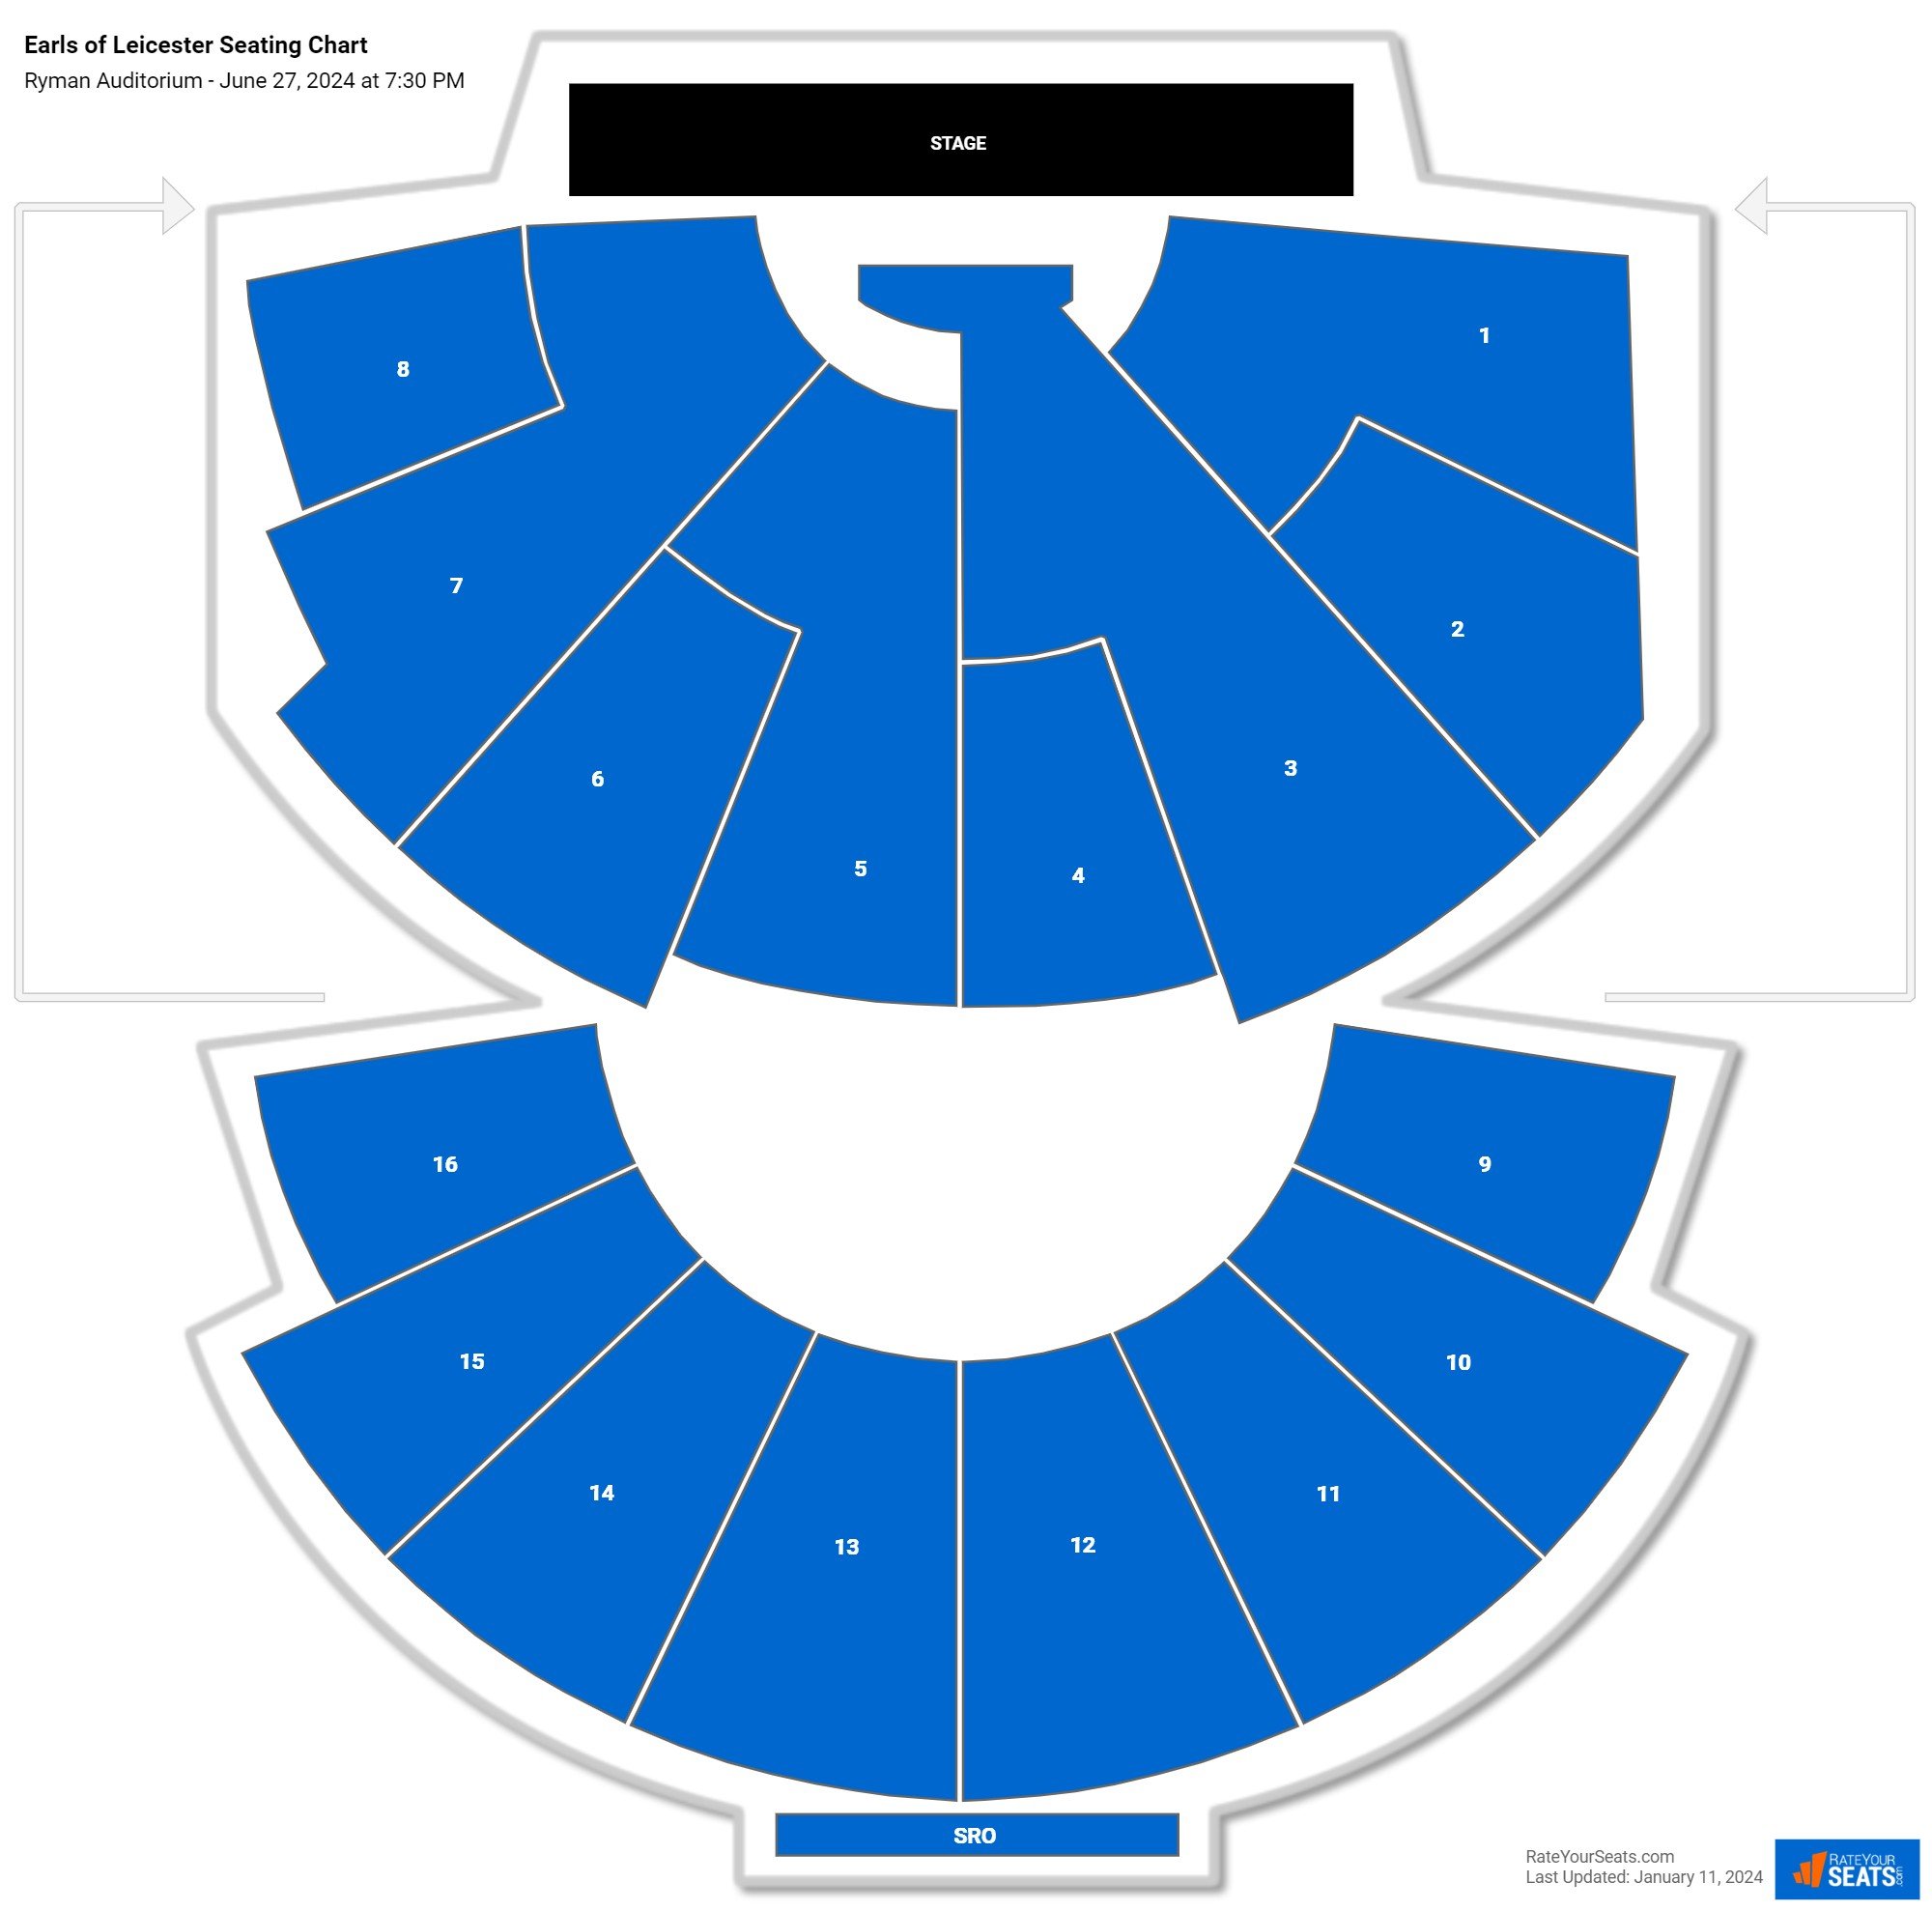 Earls of Leicester seating chart Ryman Auditorium